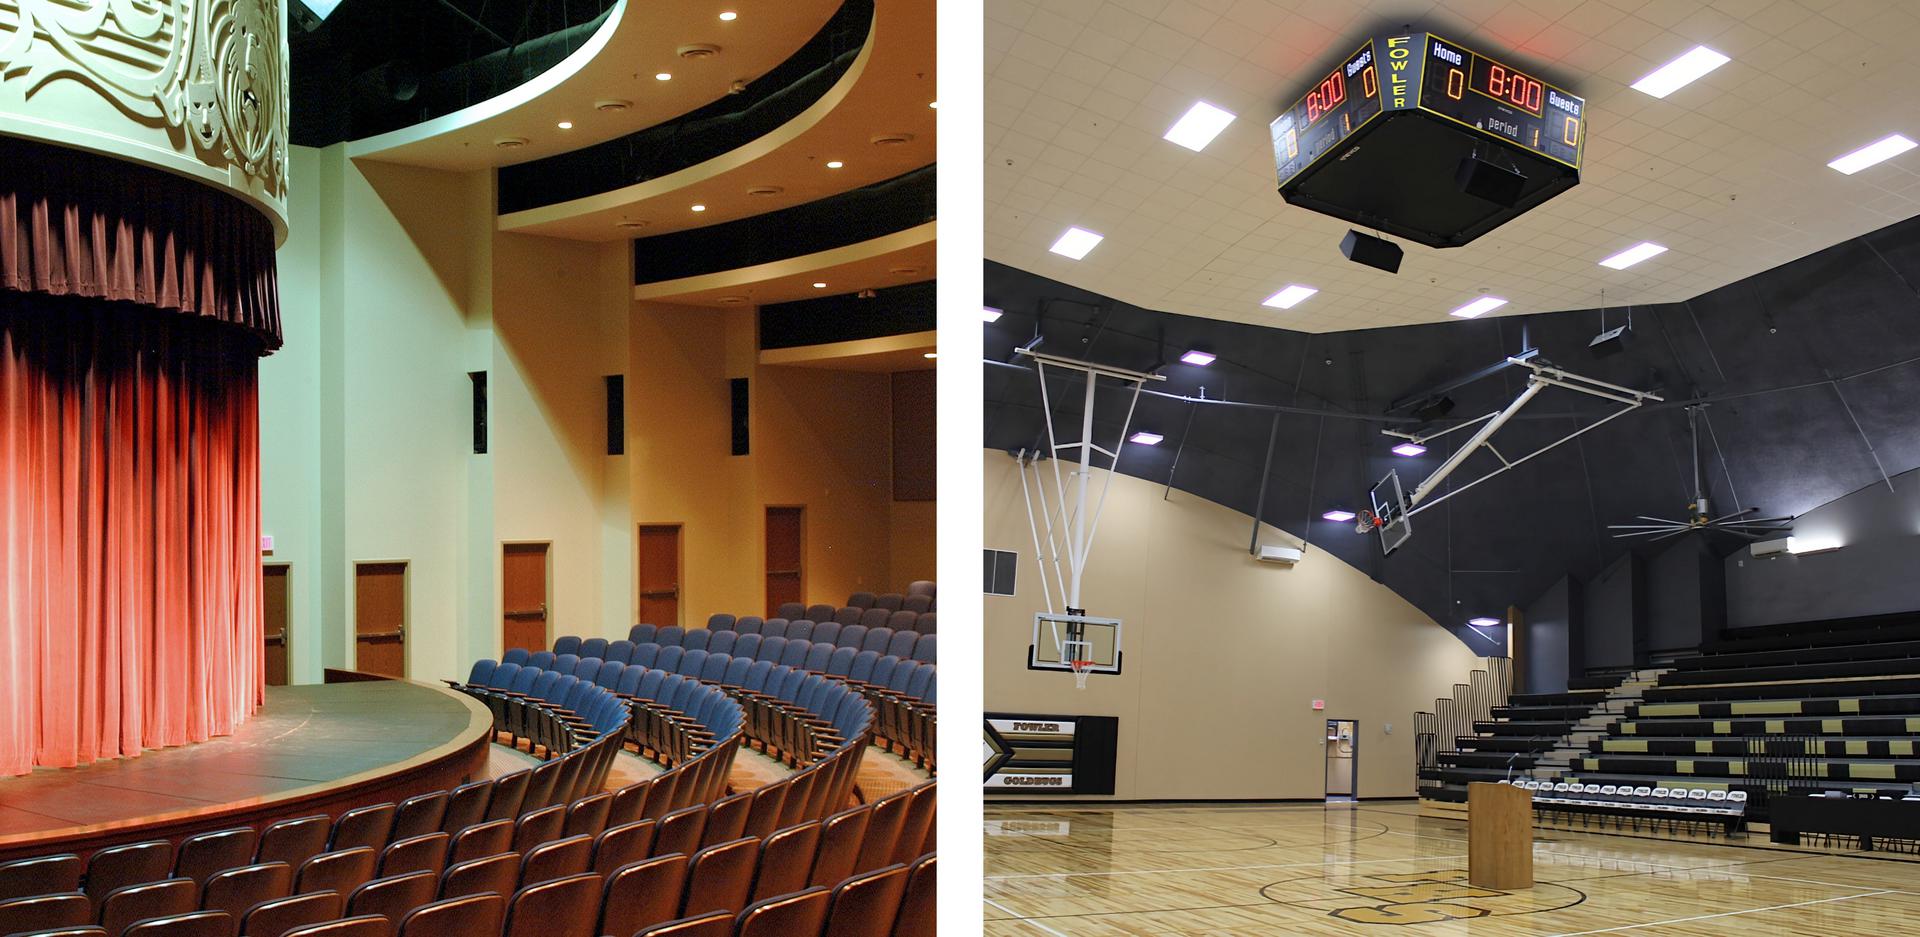 Figure 9: Theater in Gainsville, Texas, USA (left) and Gymnasium in Fowler, Kansas, USA (right)